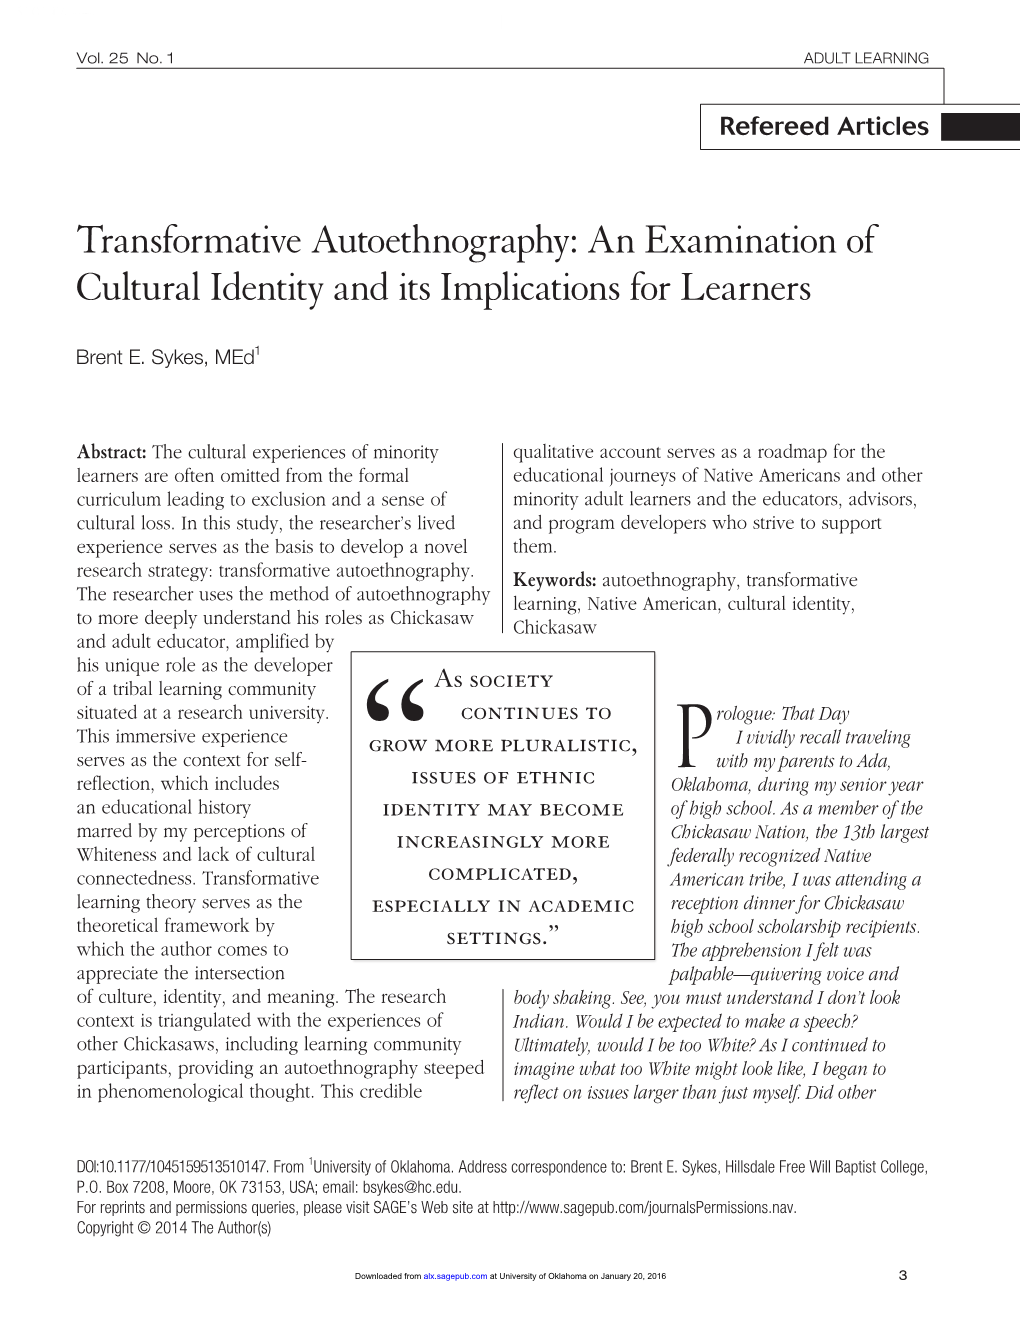 Transformative Autoethnography: an Examination of Cultural Identity and Its Implications for Learners